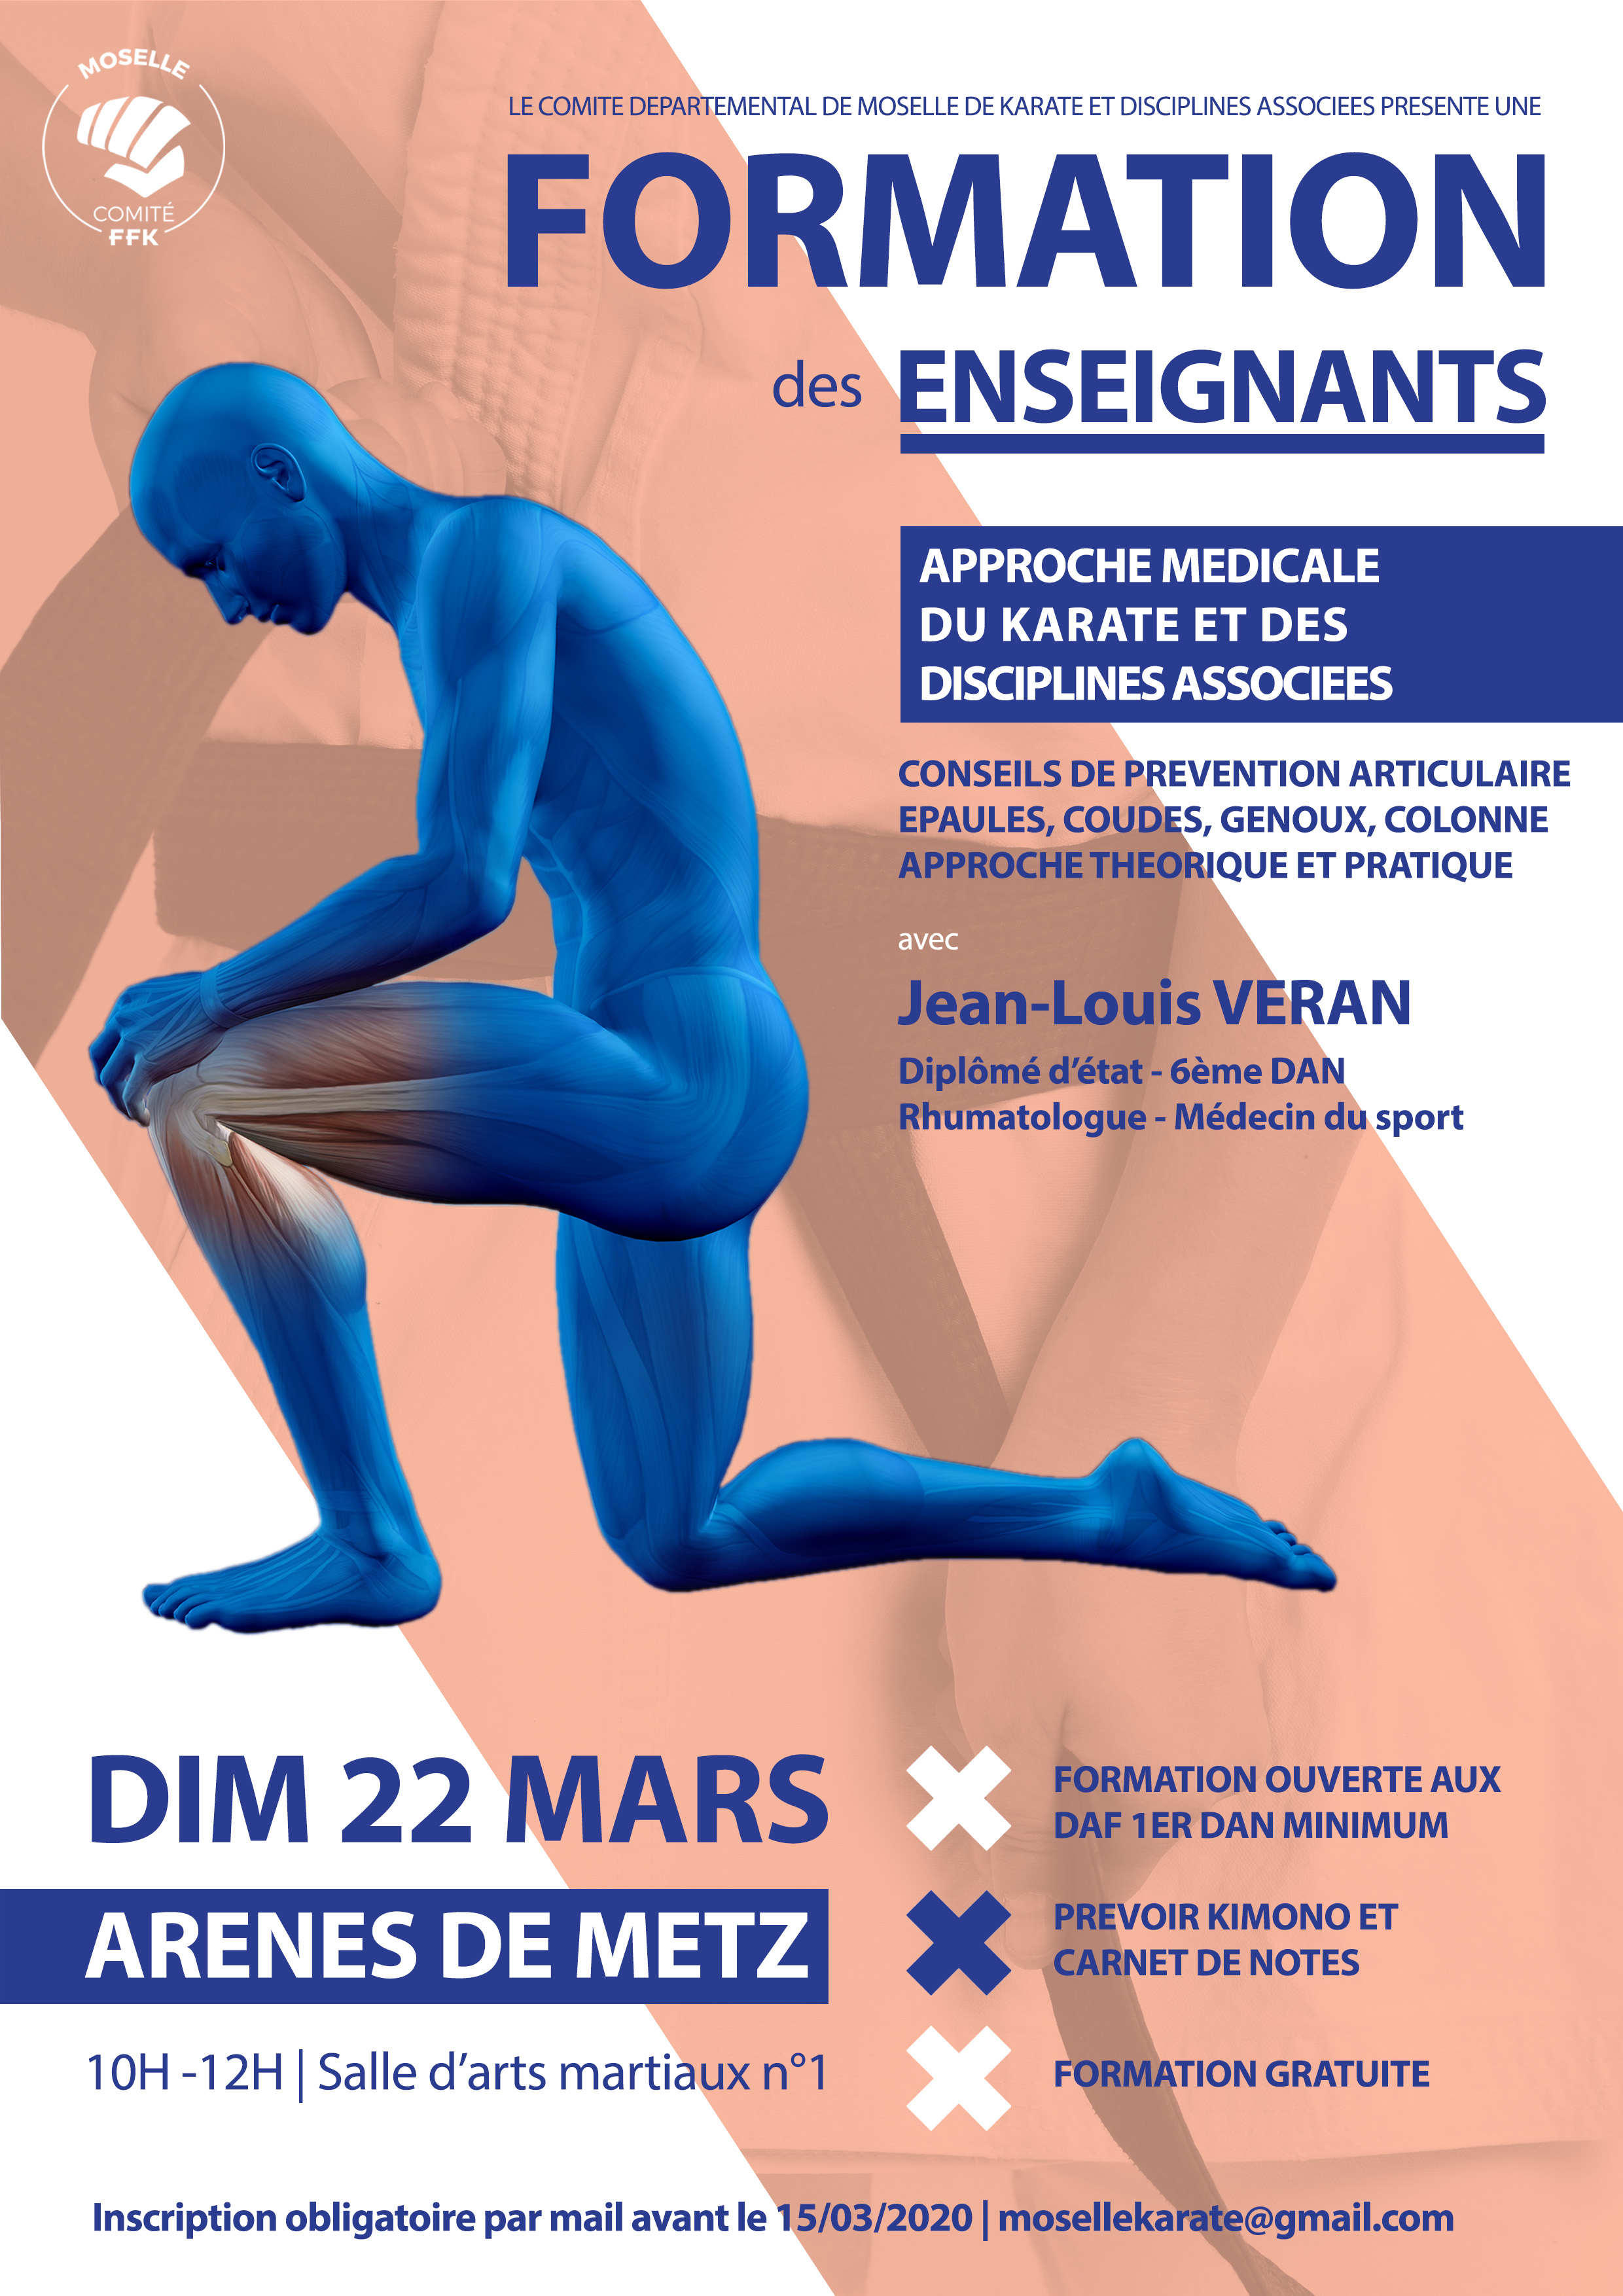 Formation enseignants comite moselle karate - approche medicale - 22 mars 2020